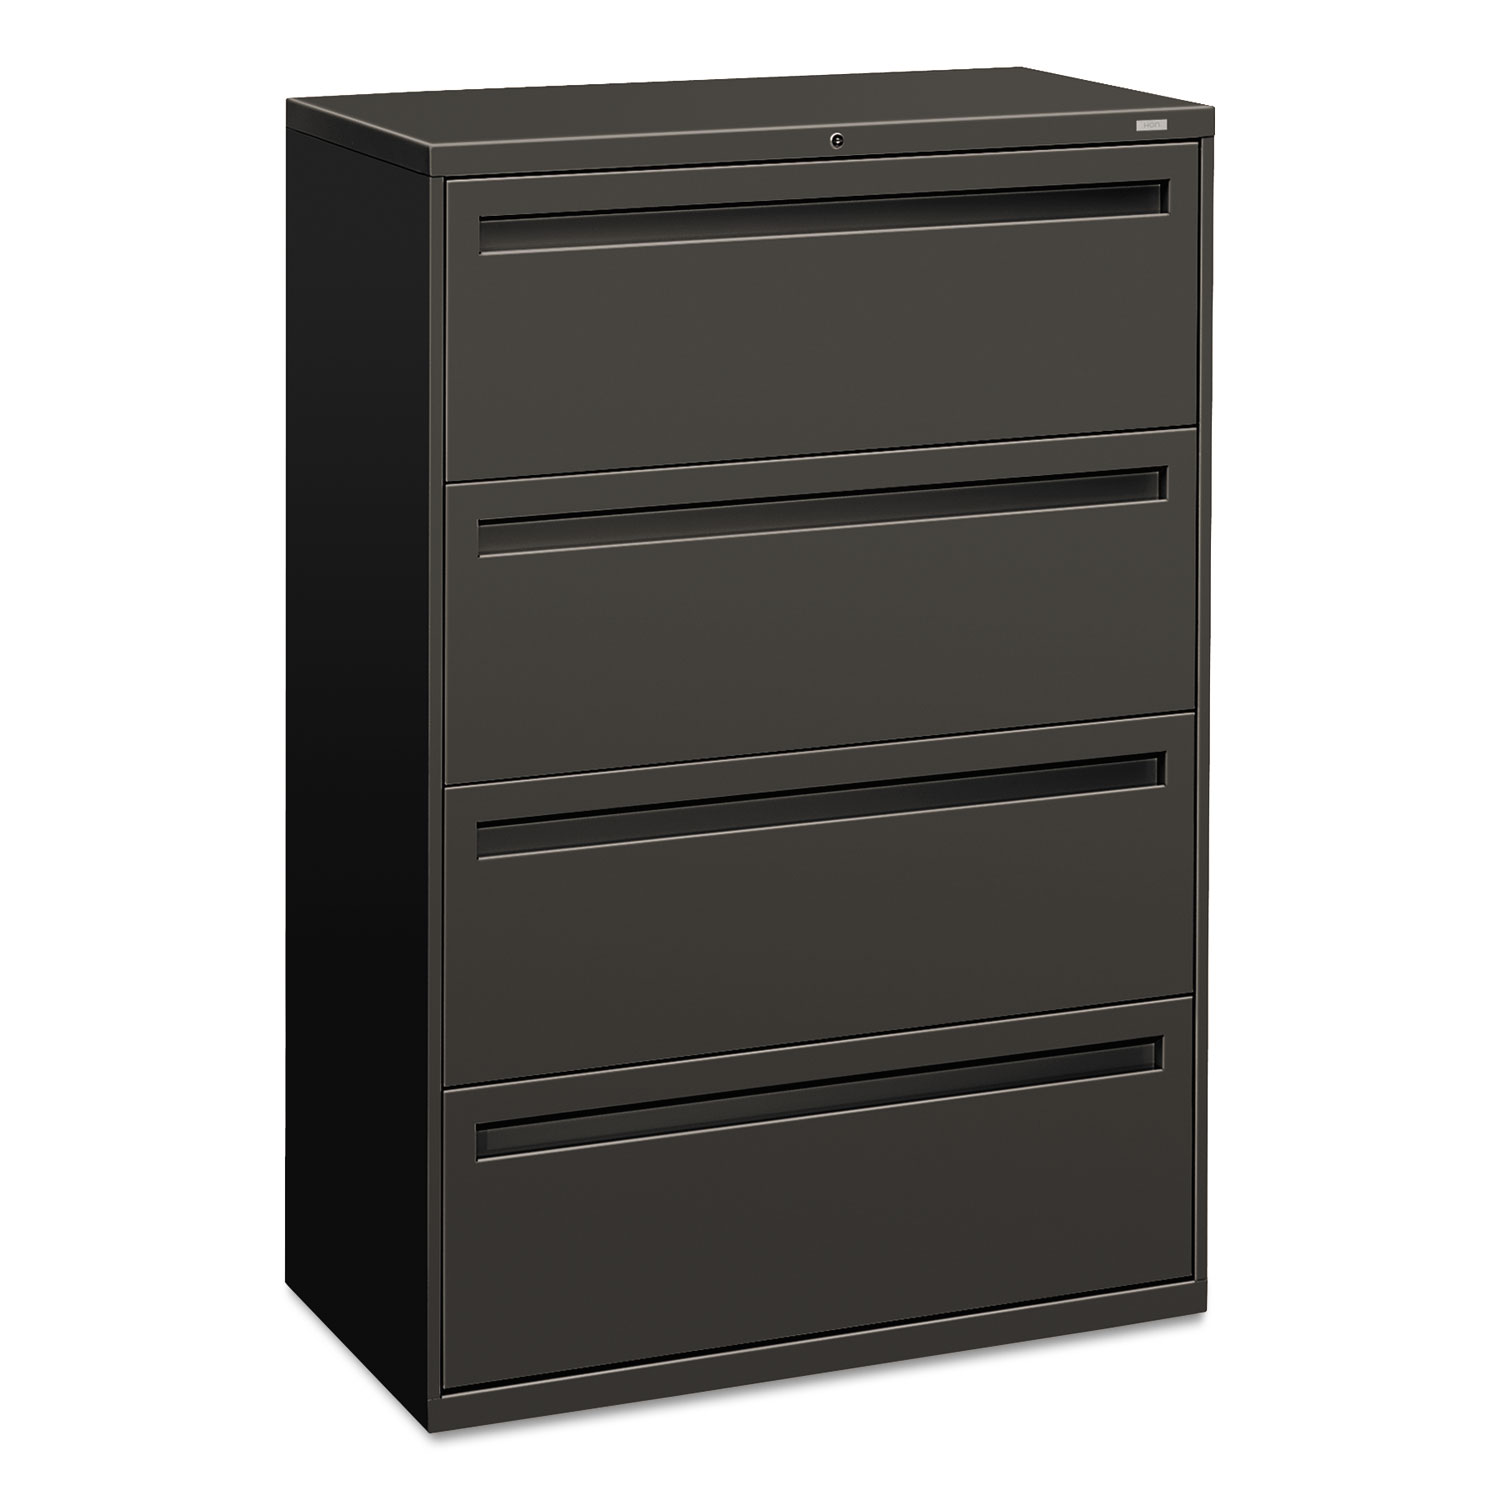  HON H784.L.S 700 Series Four-Drawer Lateral File, 36w x 18d x 52.5h, Charcoal (HON784LS) 